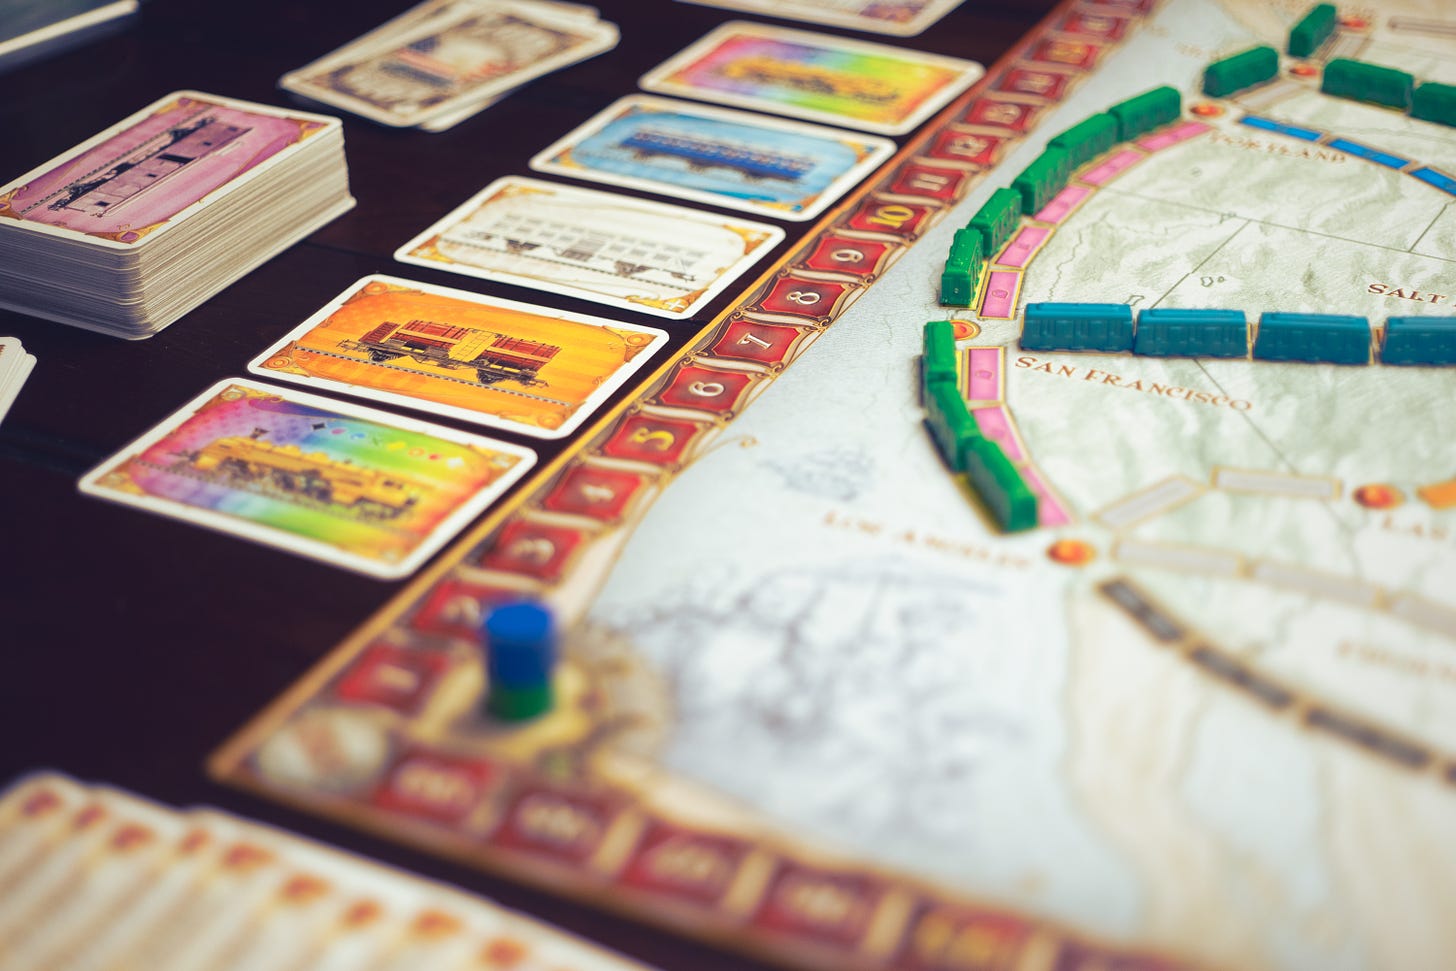 The game Ticket to Ride on a table. There are train pieces on a board, and there are train cards to the left of the board awaiting selection.